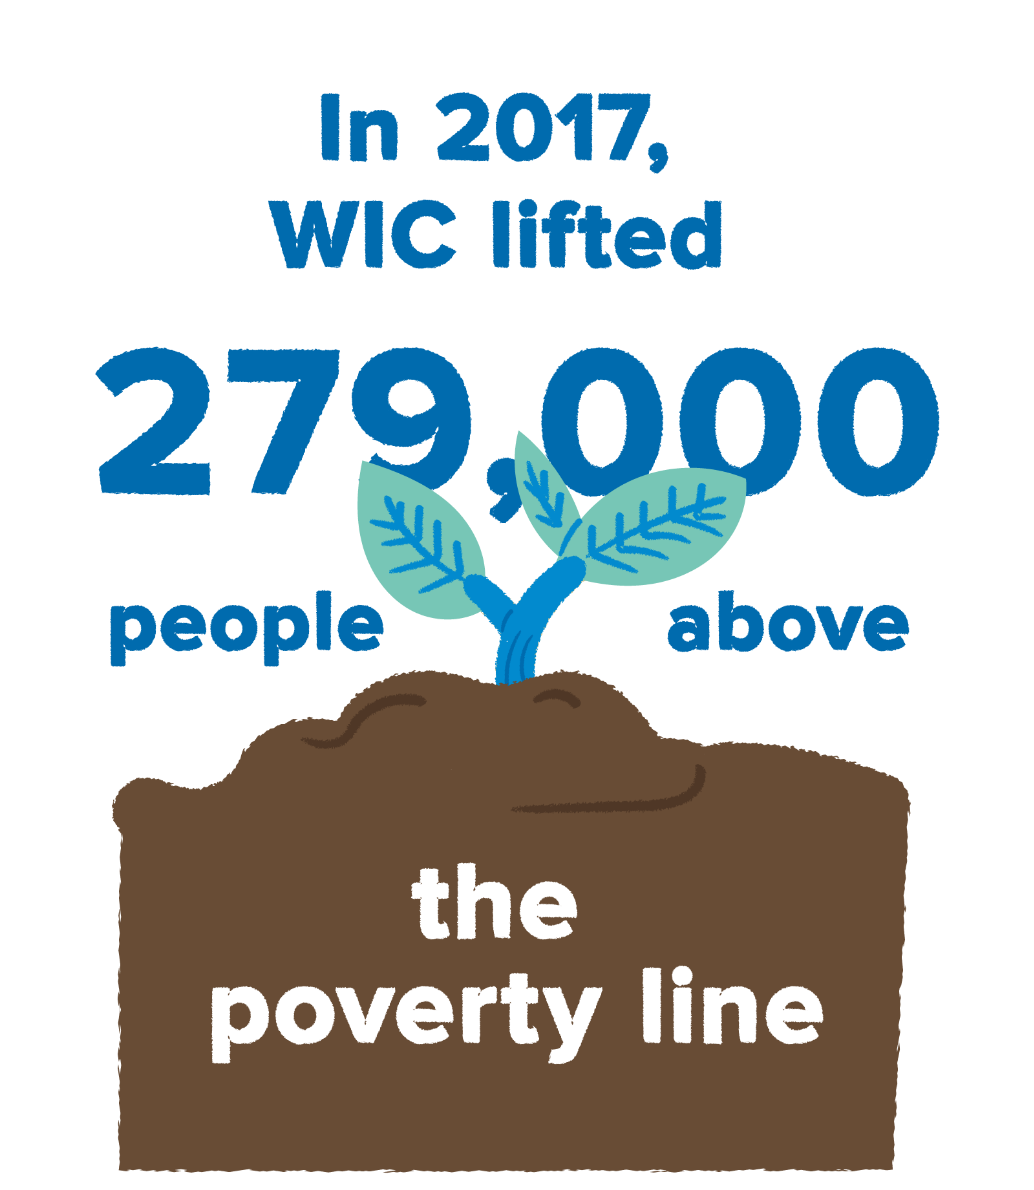 Infographic: 'In 2017, WIC lifted 279,000 people above the poverty line'